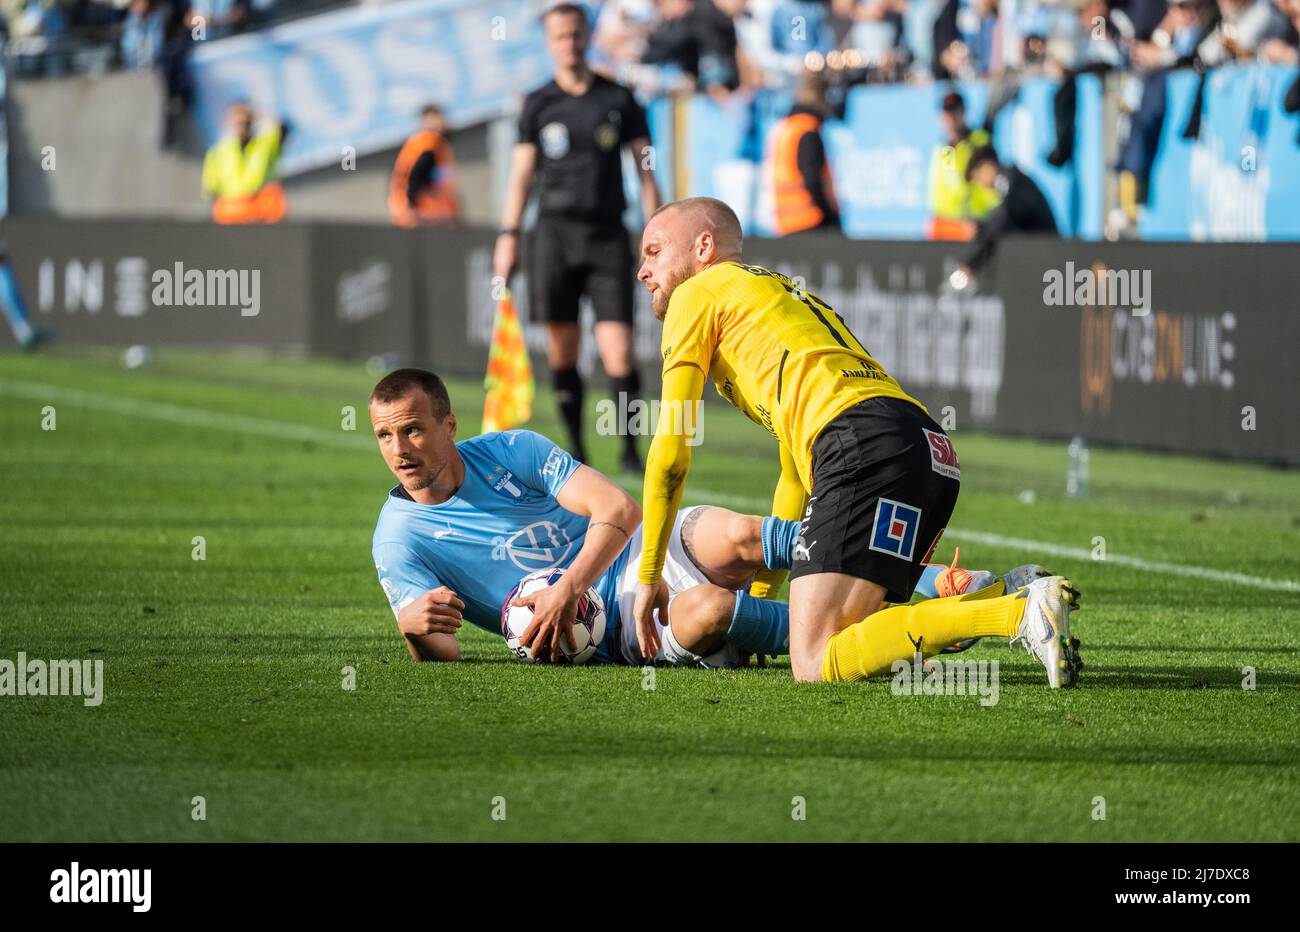 Malmoe, Sweden. 07th, May 2022. Eric Larsson (2) of Malmoe FF and Adam Staahl (11) of Mjallby seen during the Allsvenskan match between Malmoe FF and Mjallby at Eleda Stadion in Malmoe. (Photo credit: Gonzales Photo - Joe Miller). Stock Photo